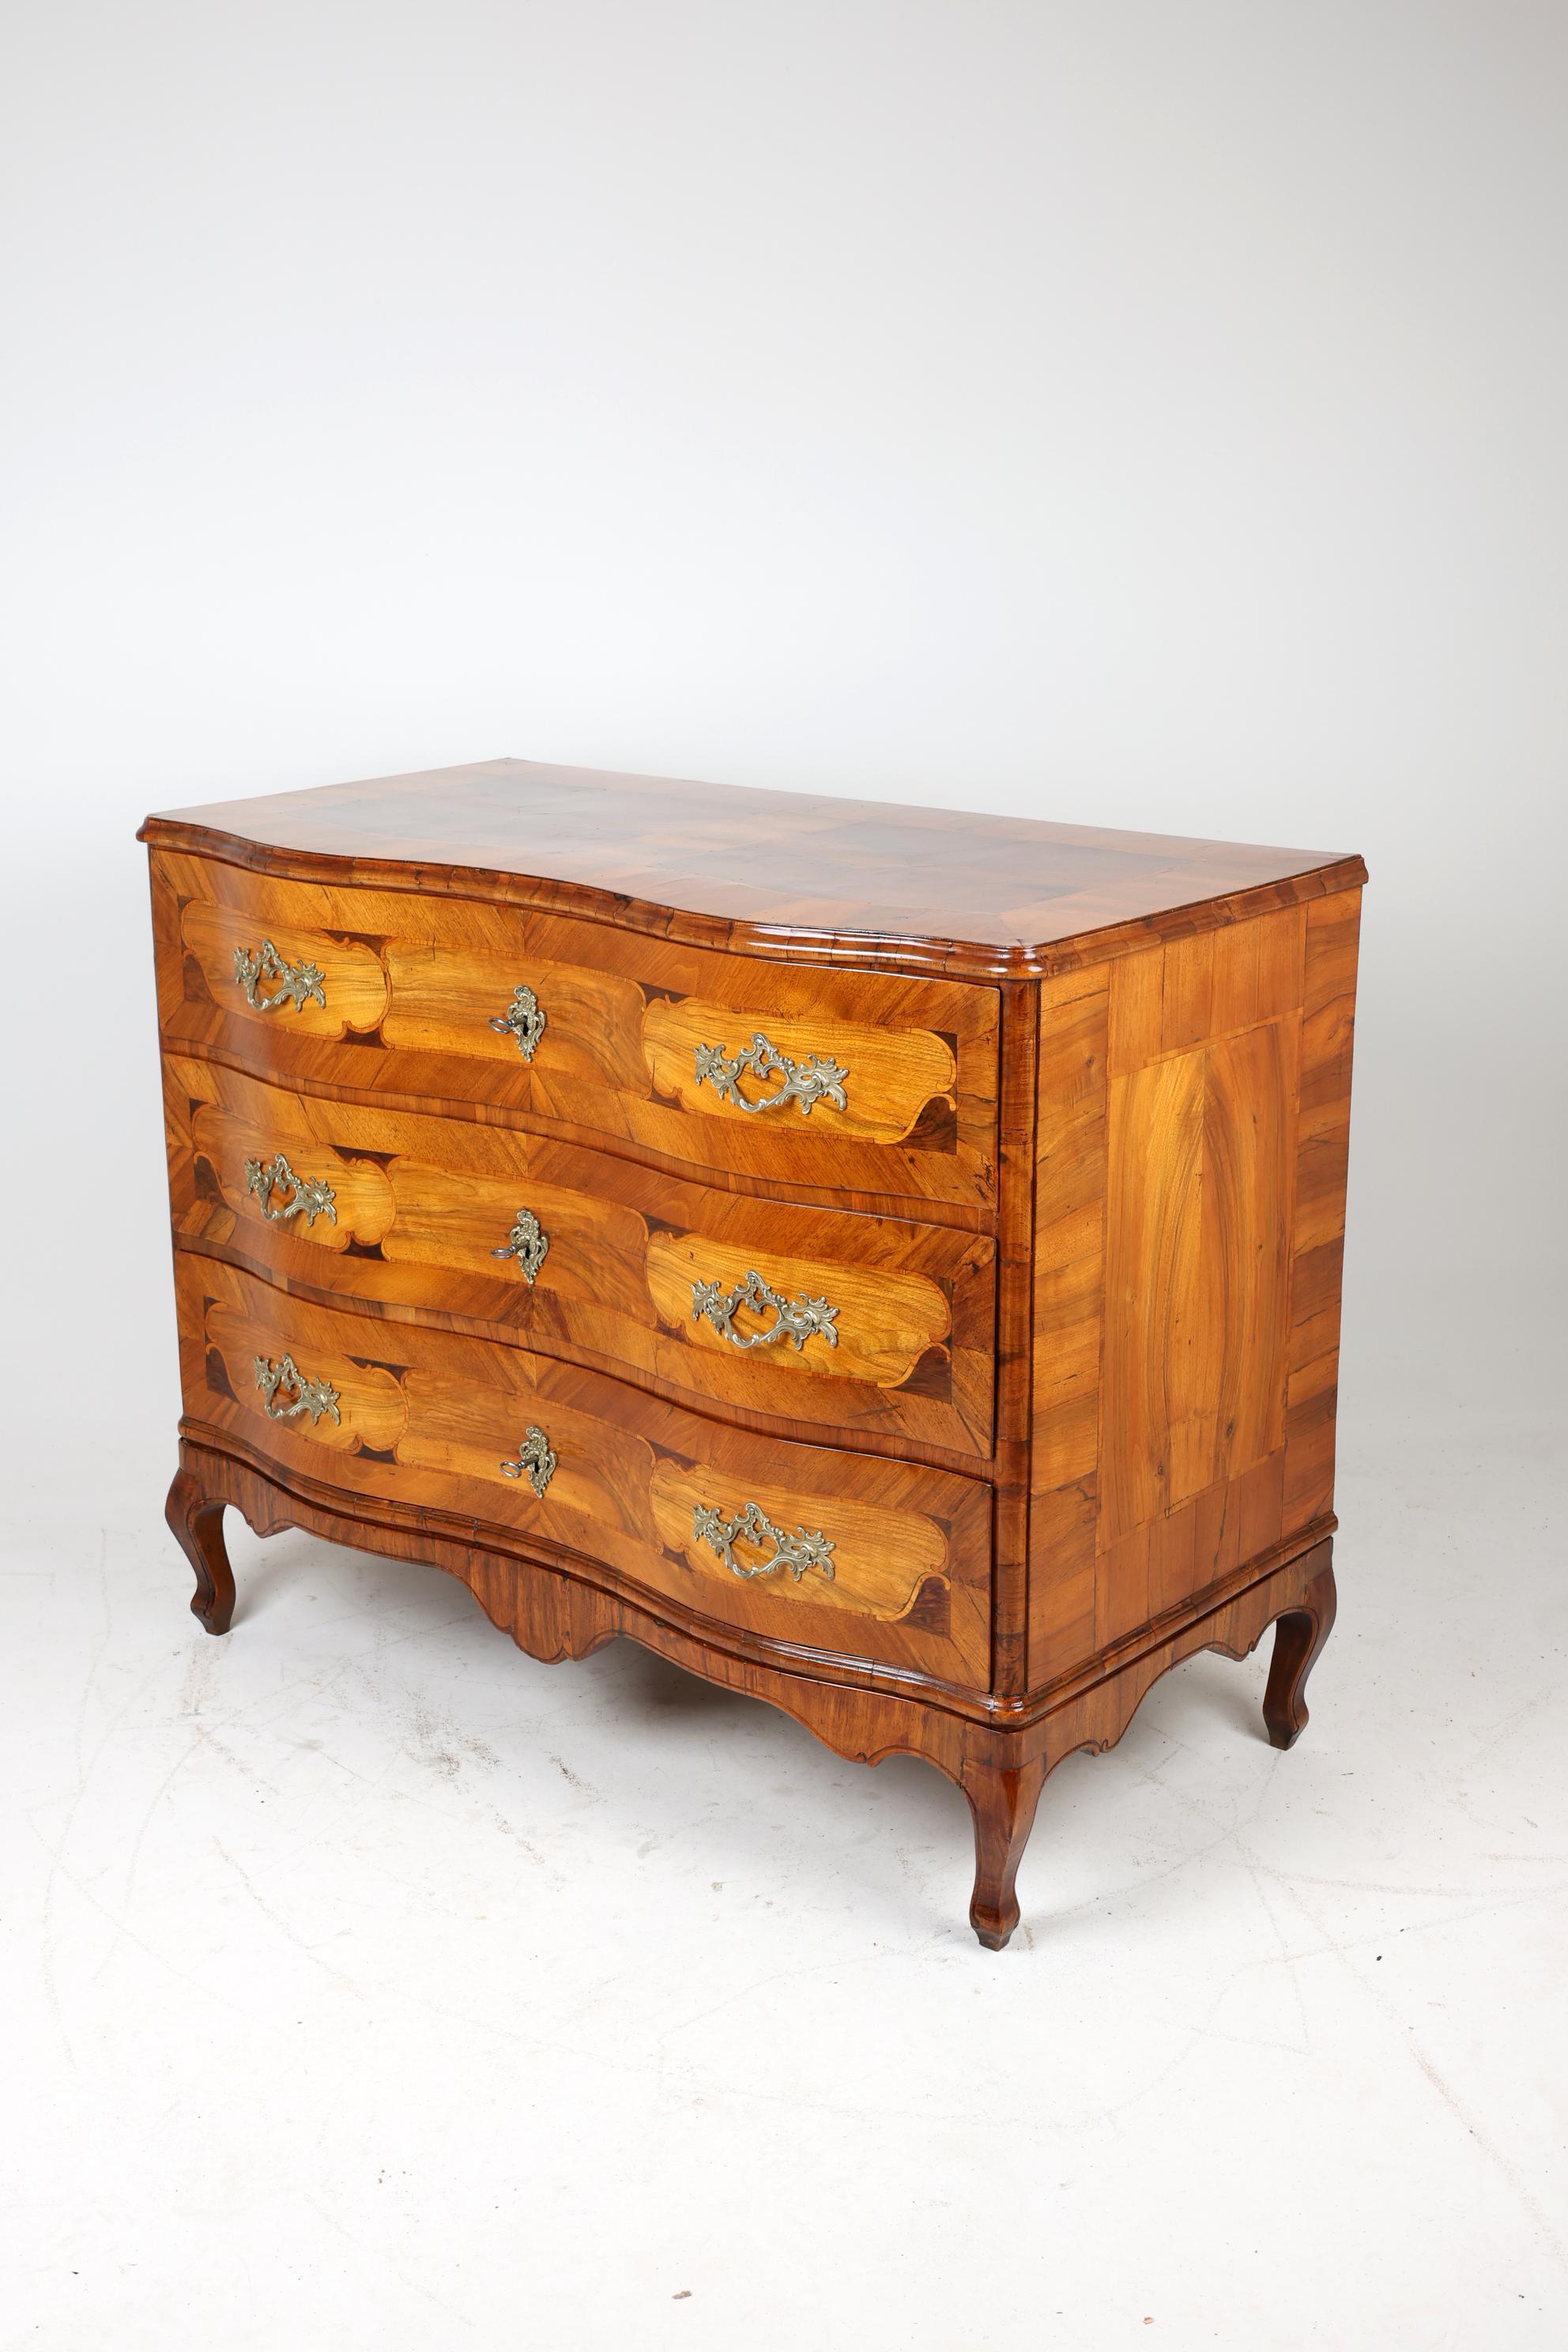 Late 18th Century Baroque Commode,
1780-1790, Germany
Walnut

Beautiful baroque walnut chest of drawers with three drawers, made in Franconia at the end of the 18th century. The chest of drawers impresses with its authentic antique look and elegant